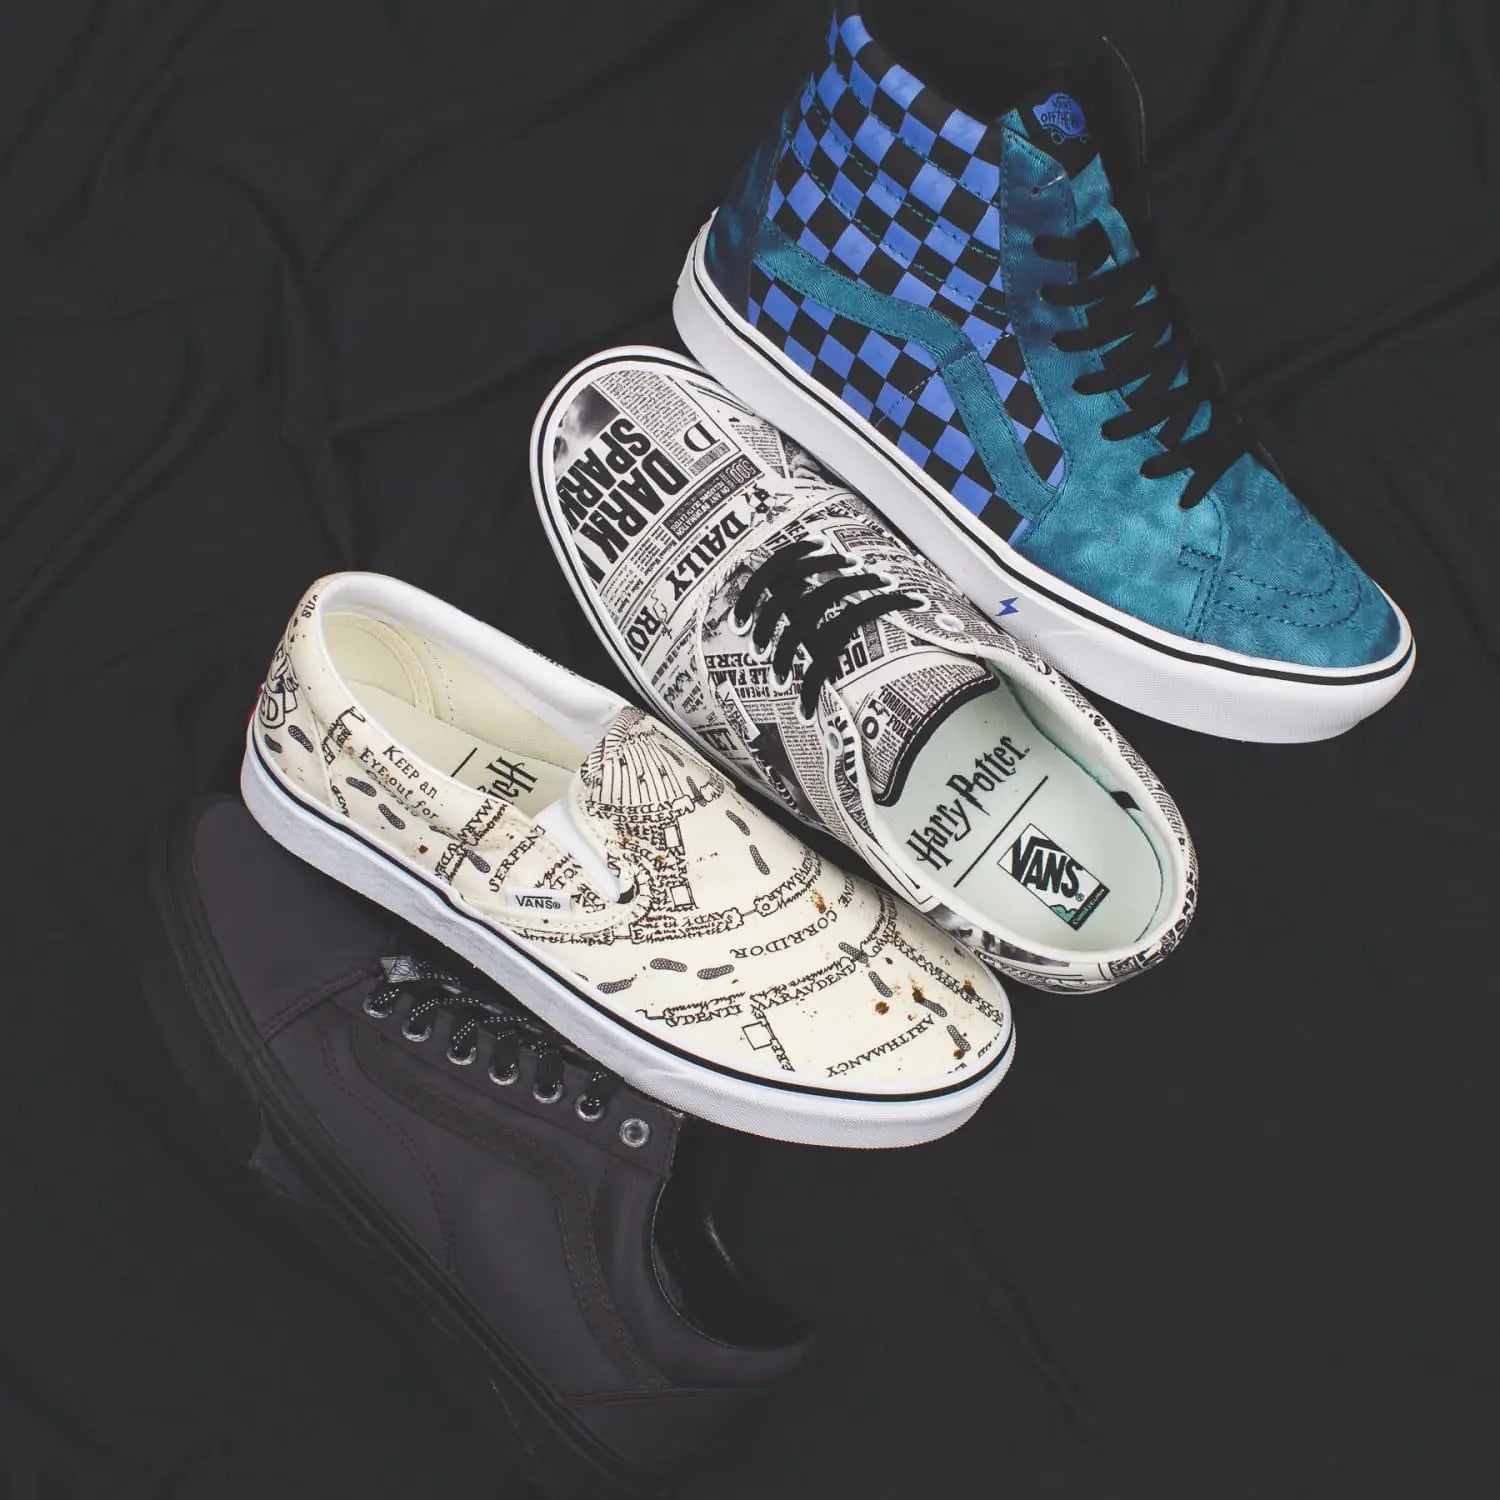 Vans x Harry Potter - Footwear and Apparel Collection